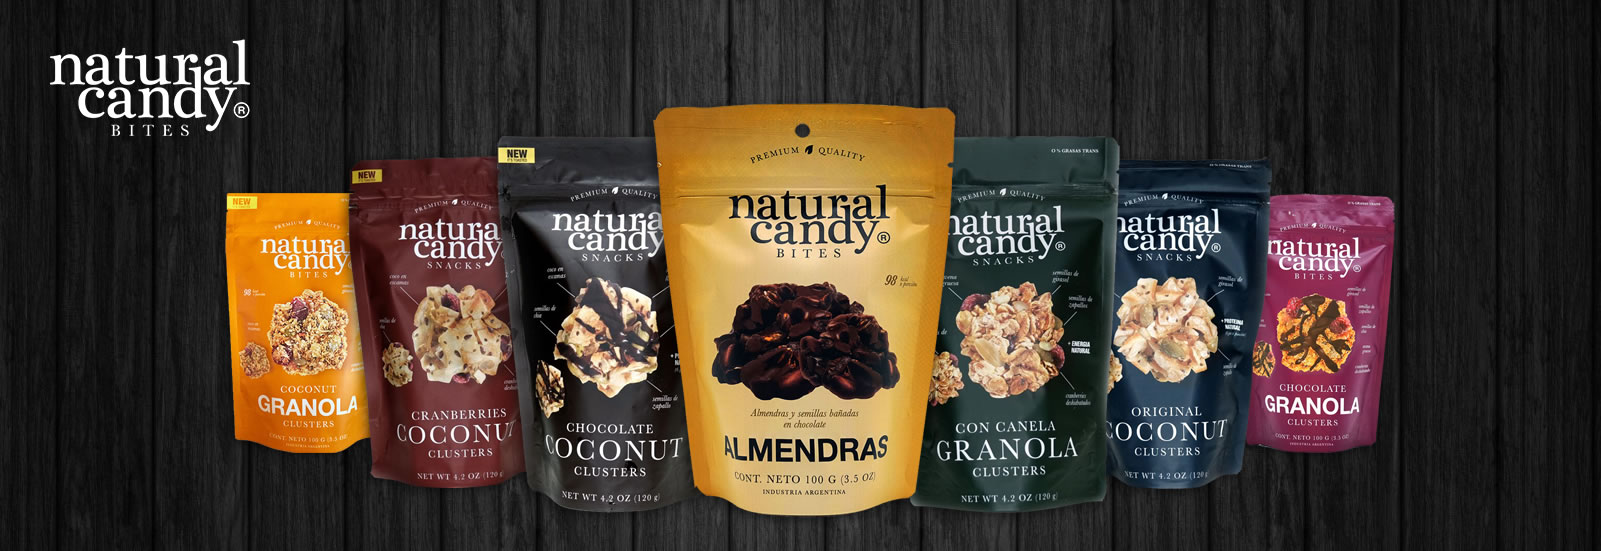 productos natural candy